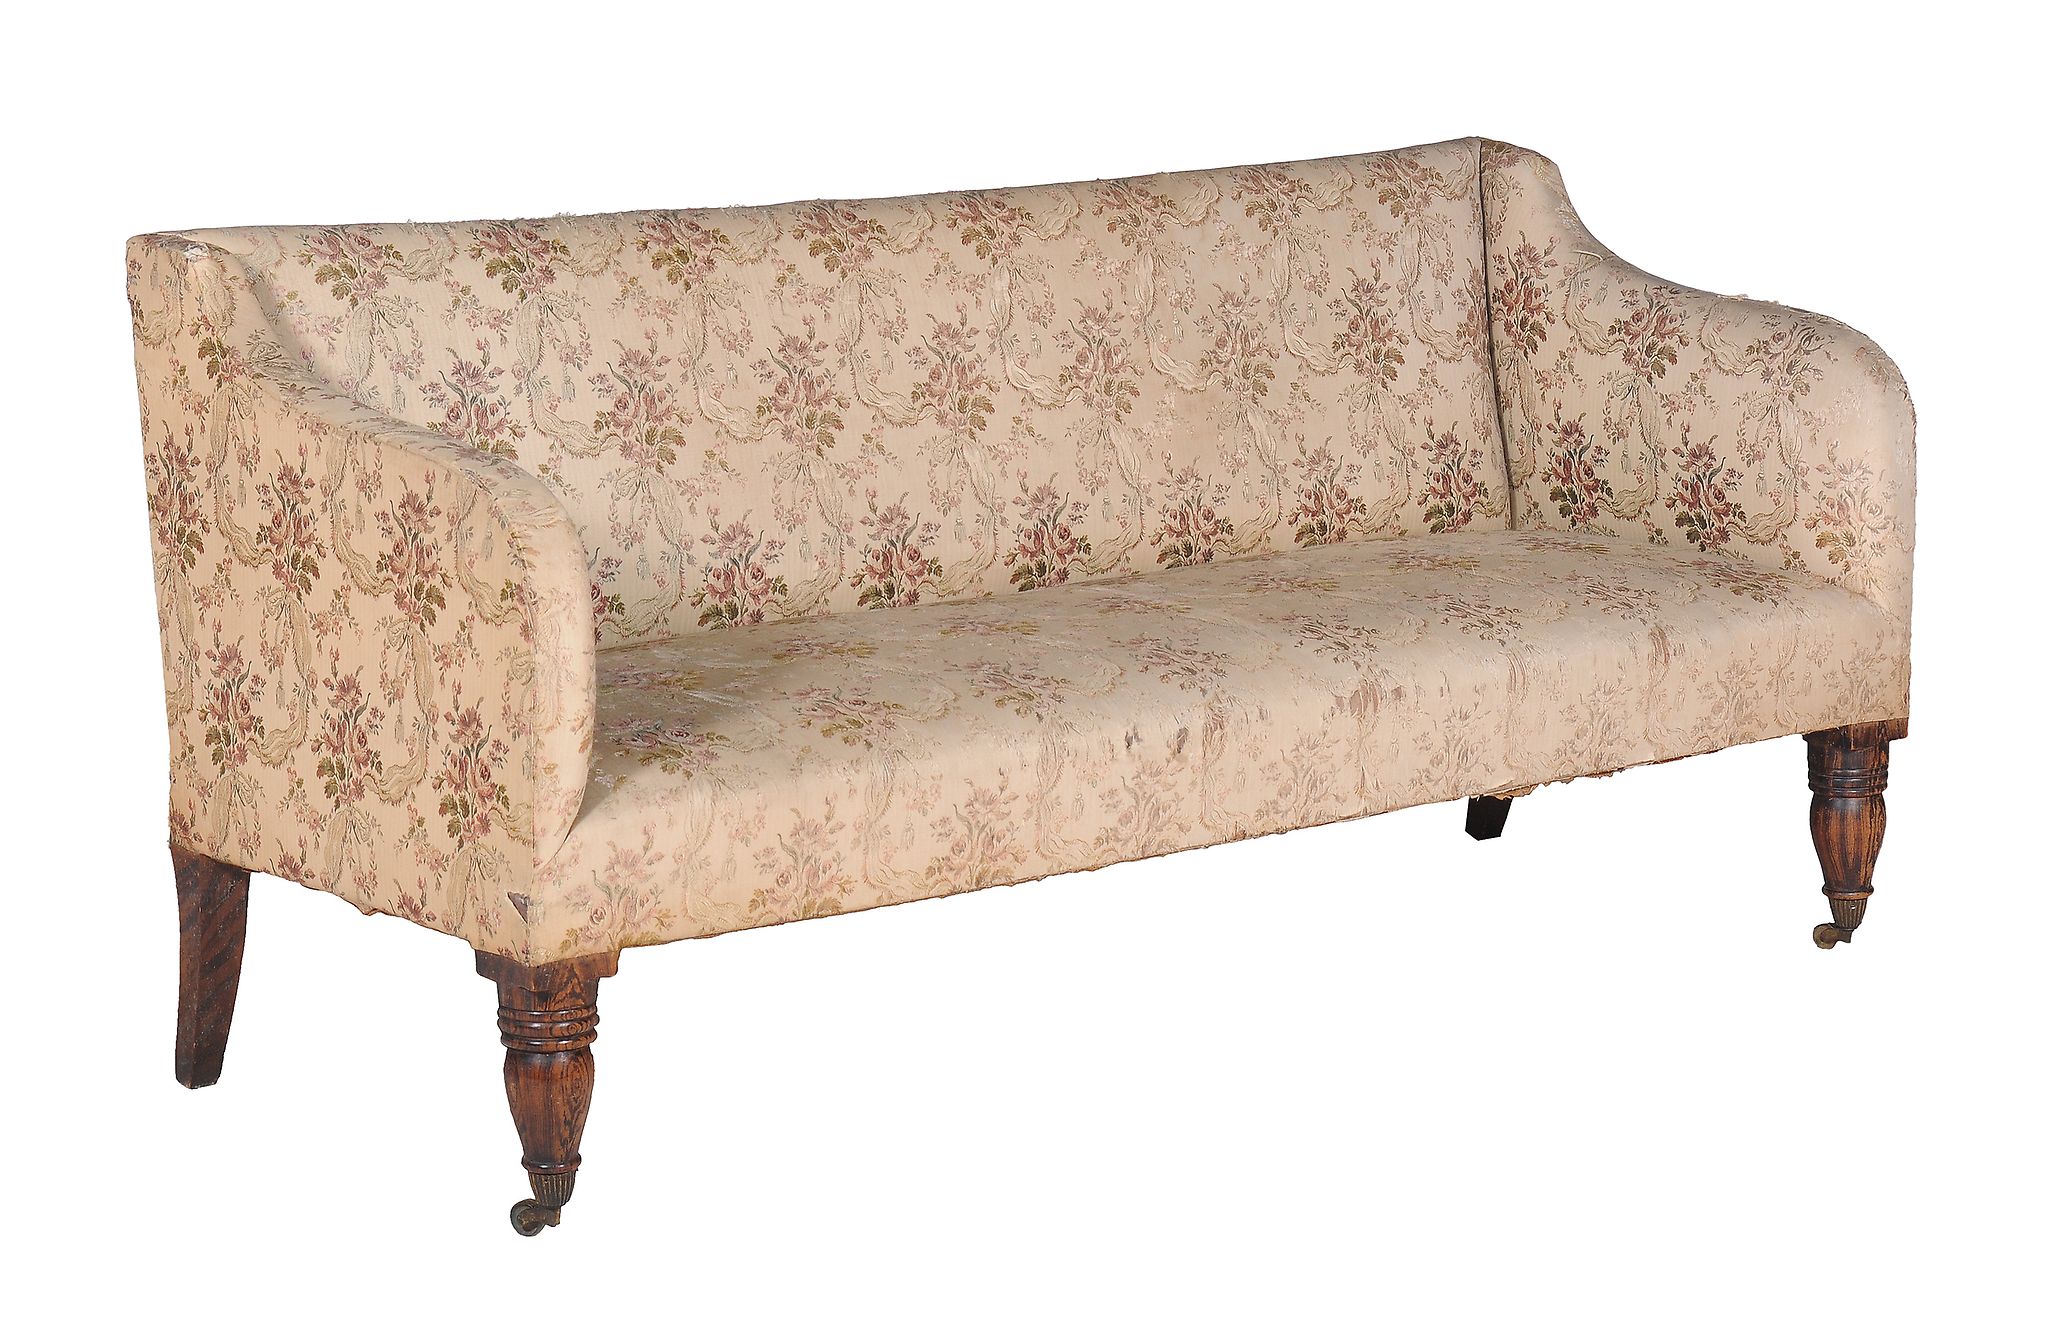 A George IV simulated rosewood sofa, circa 1825, covered with antique upholstery, the downswept